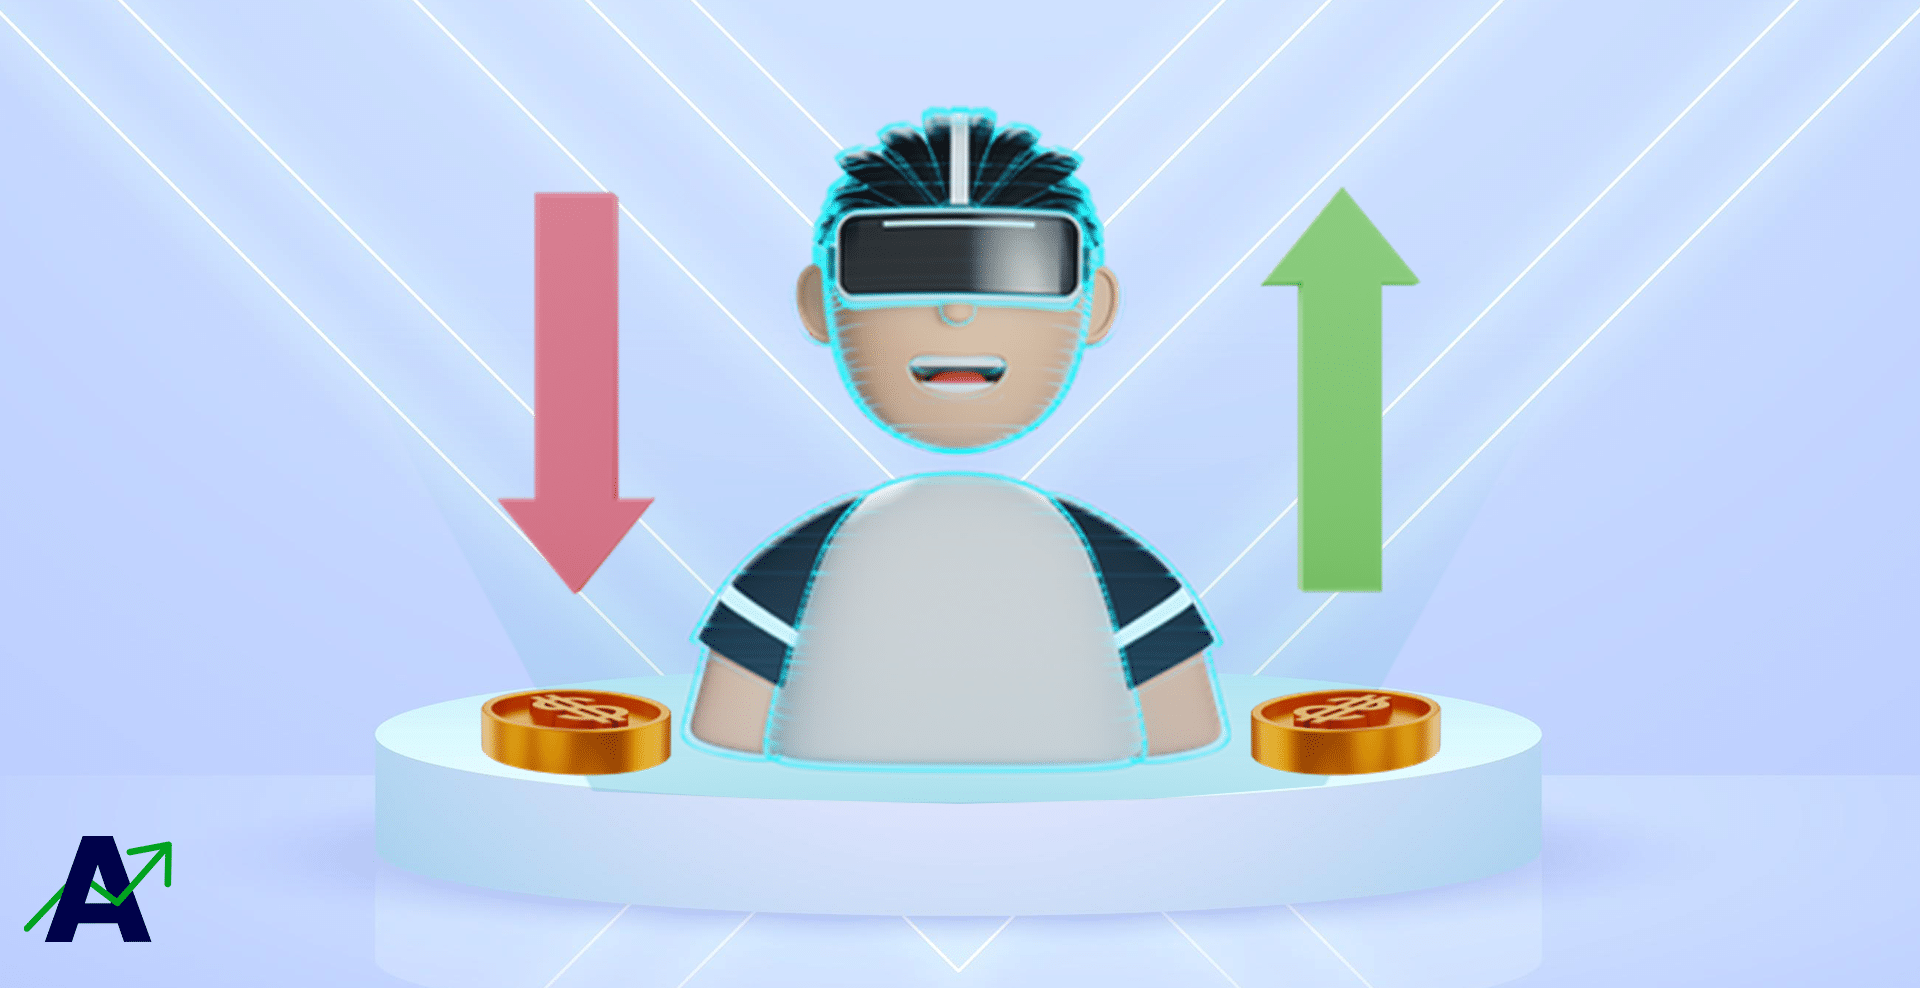 Most Popular Metaverse Coins & Tokens